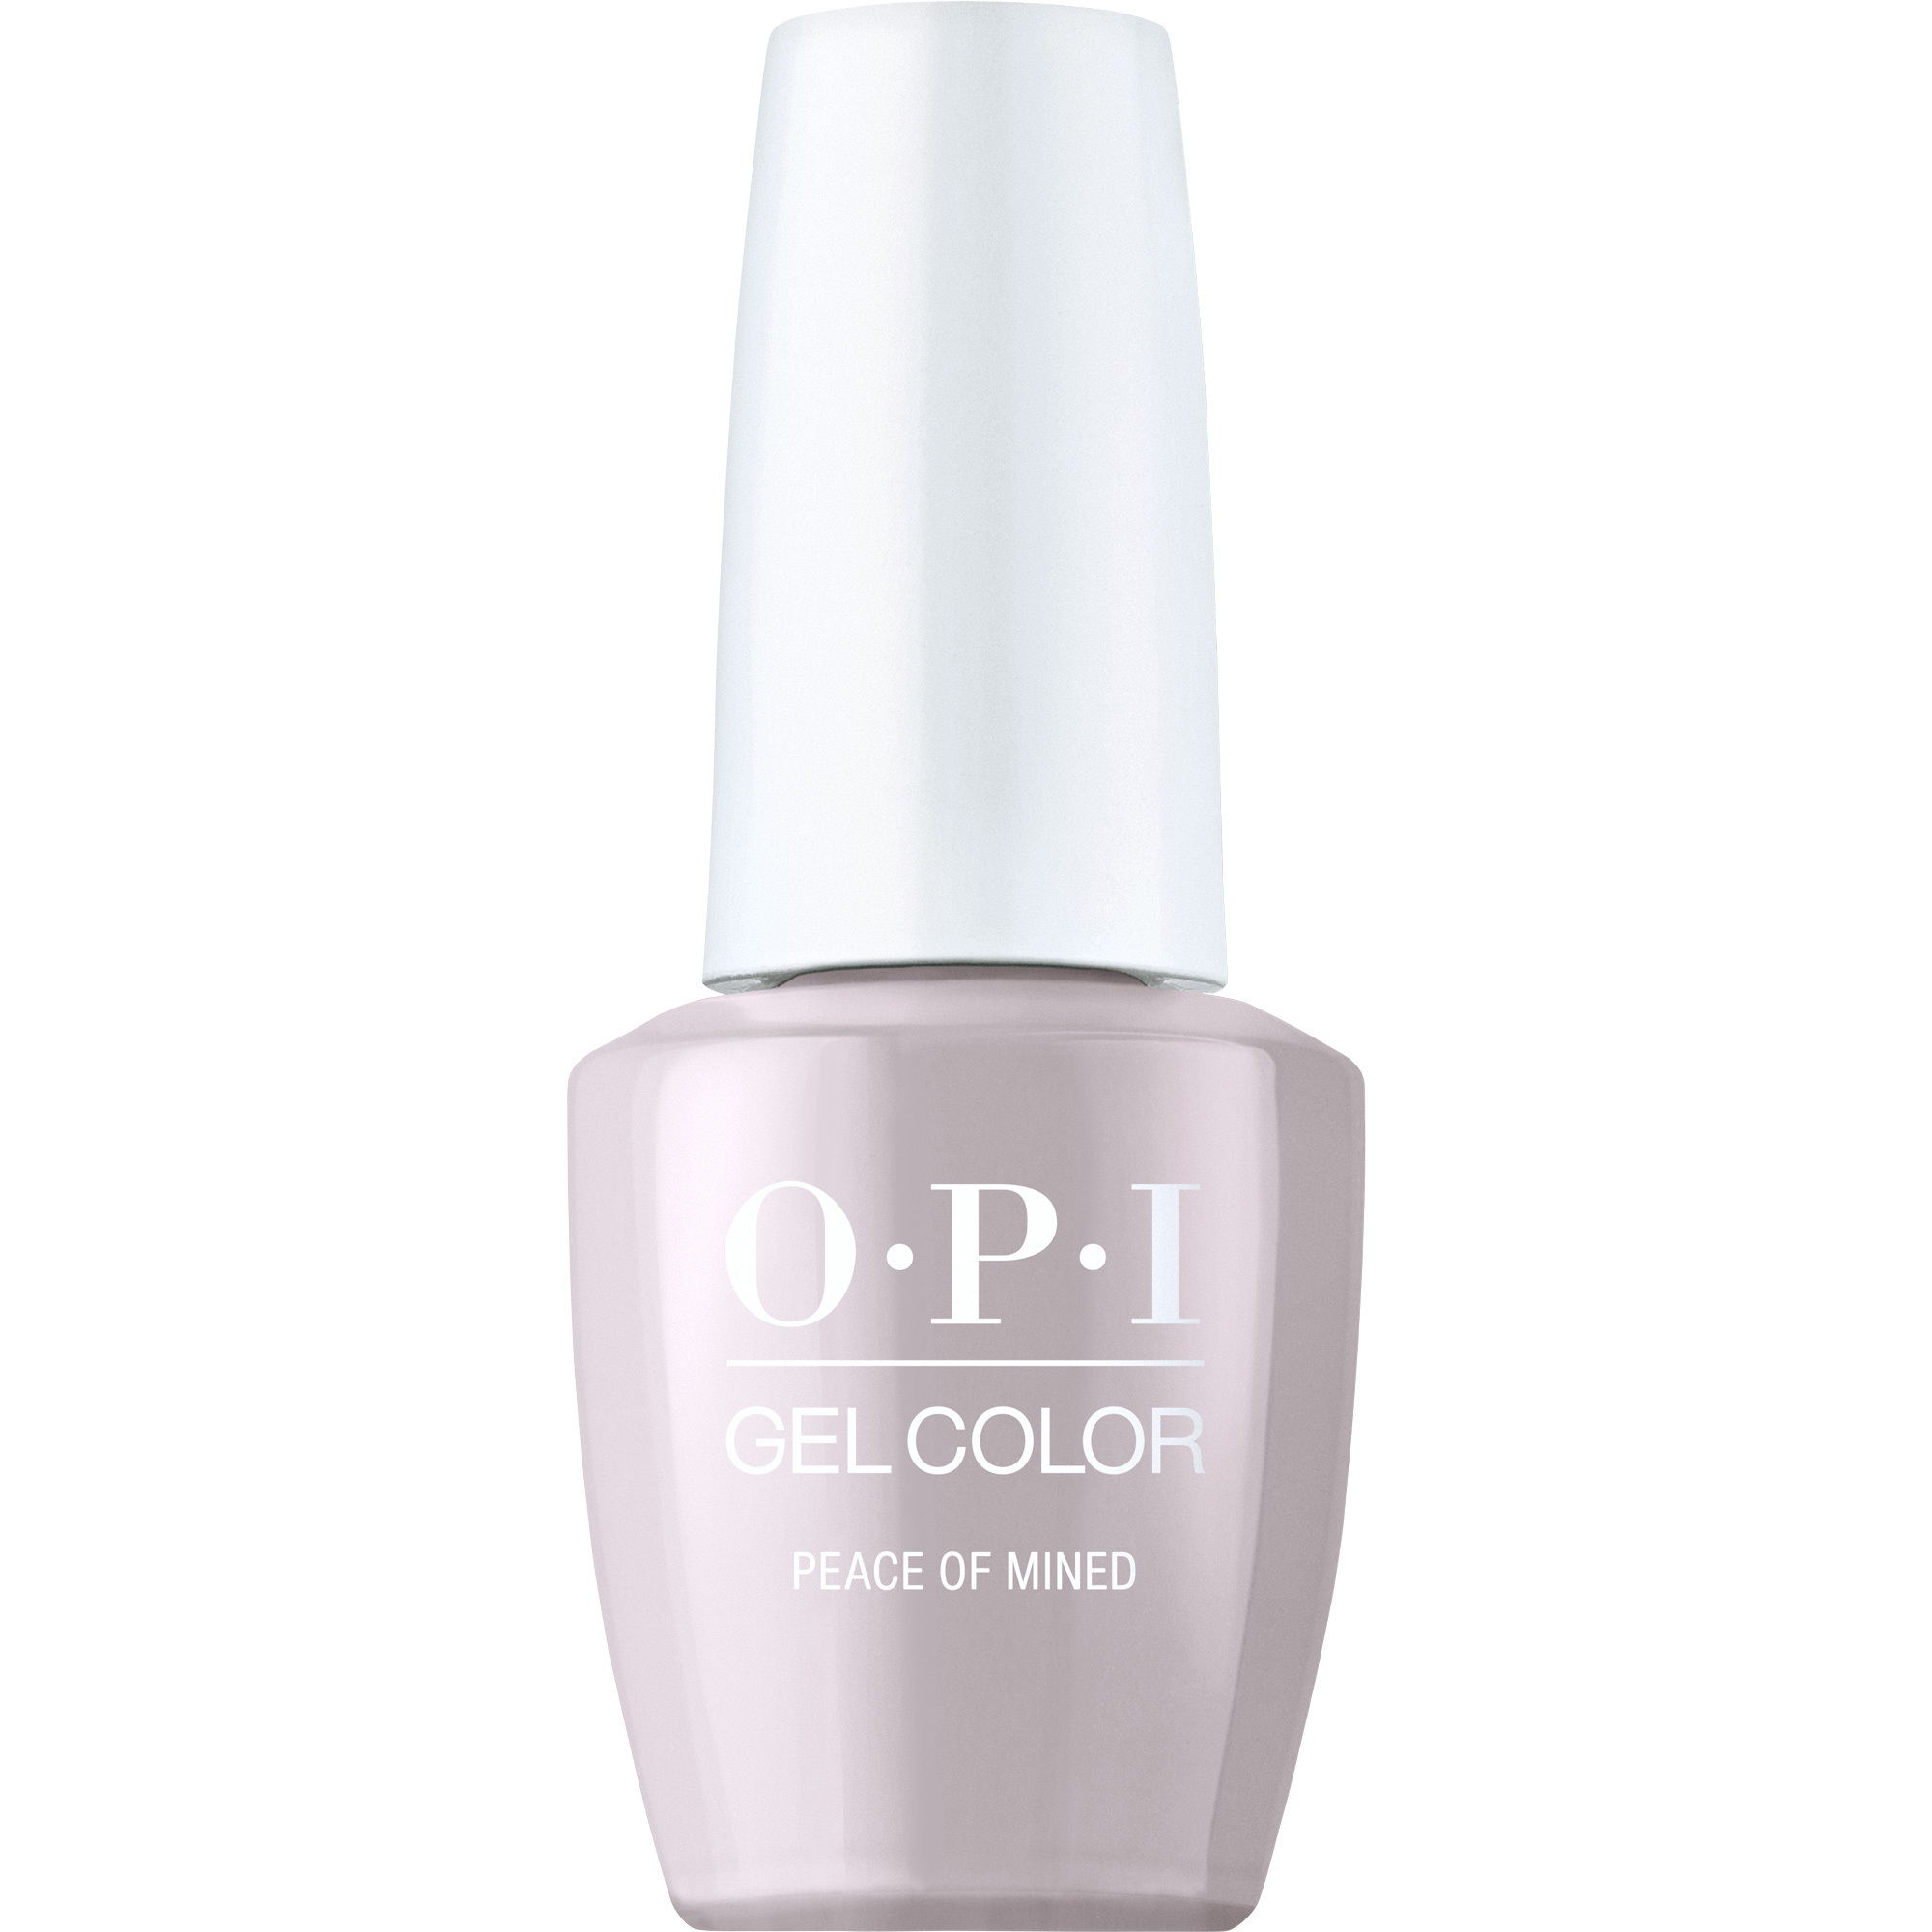 OPI Gel Color 360 - Peace of Mined